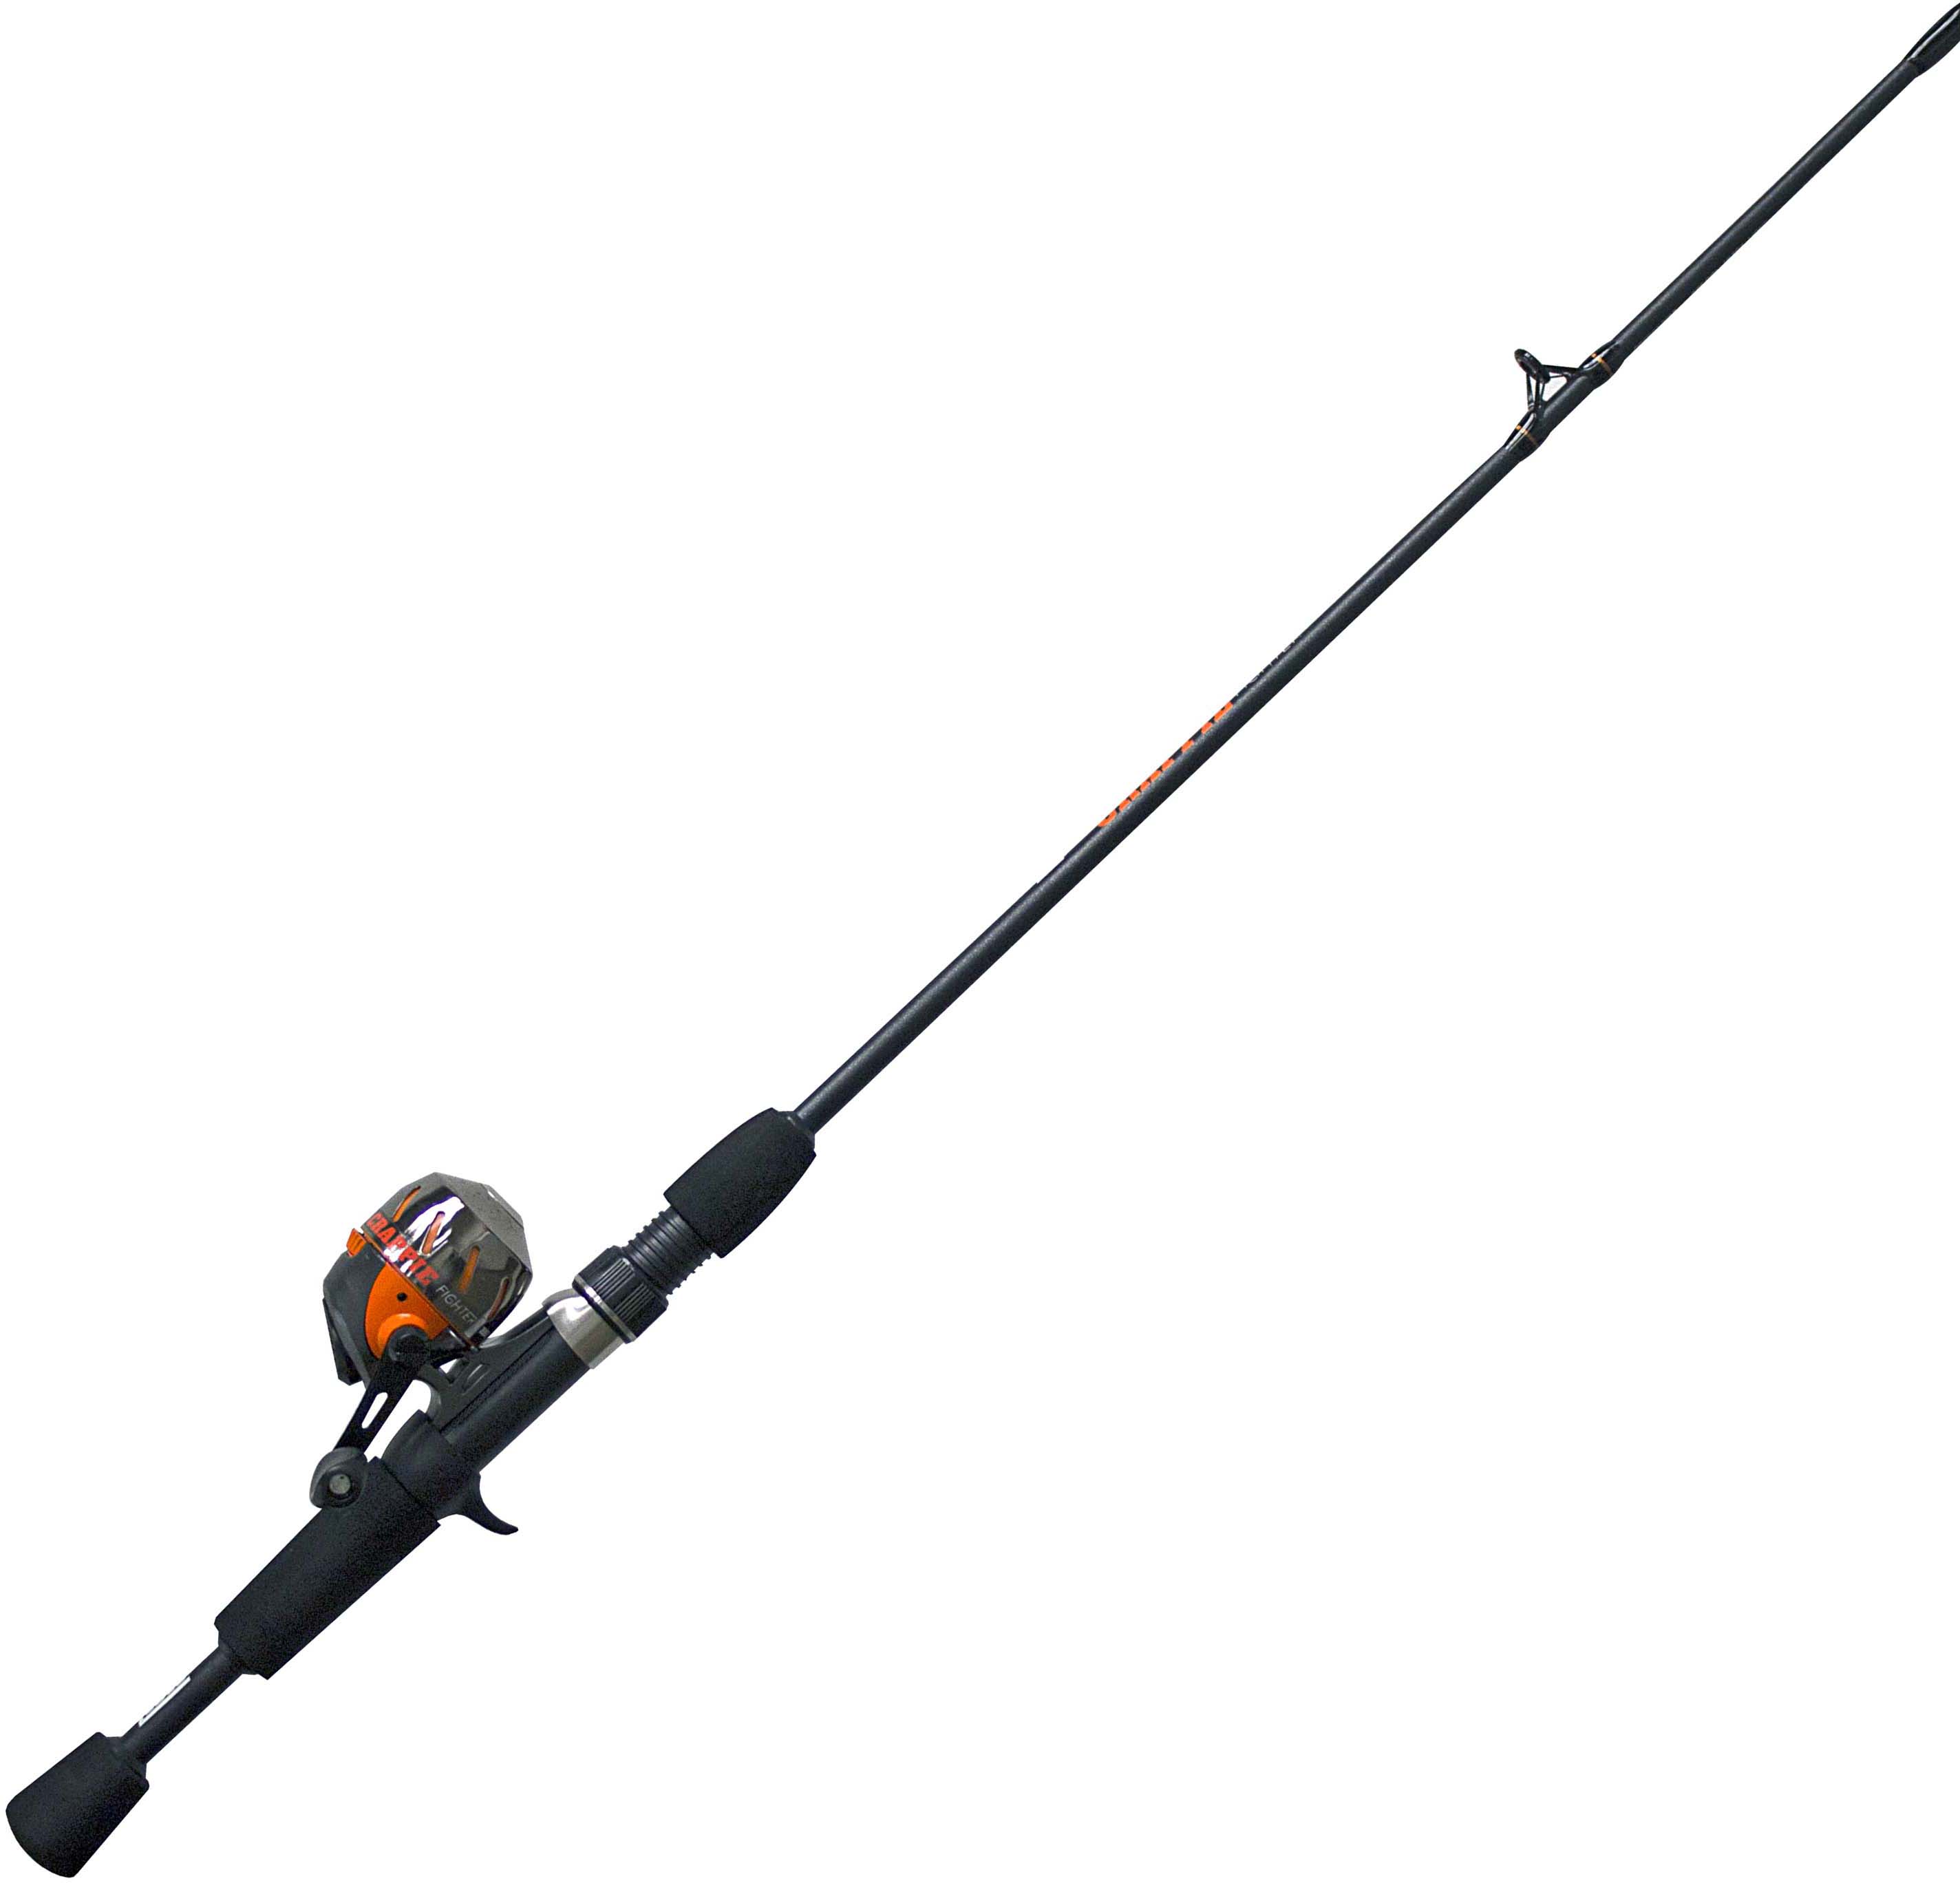 https://op1.0ps.us/original/opplanet-zebco-crappie-fighter-ultralight-2-piece-spincast-combo-prespooled-with-6-5ft-crfsc502ula-ns4-main